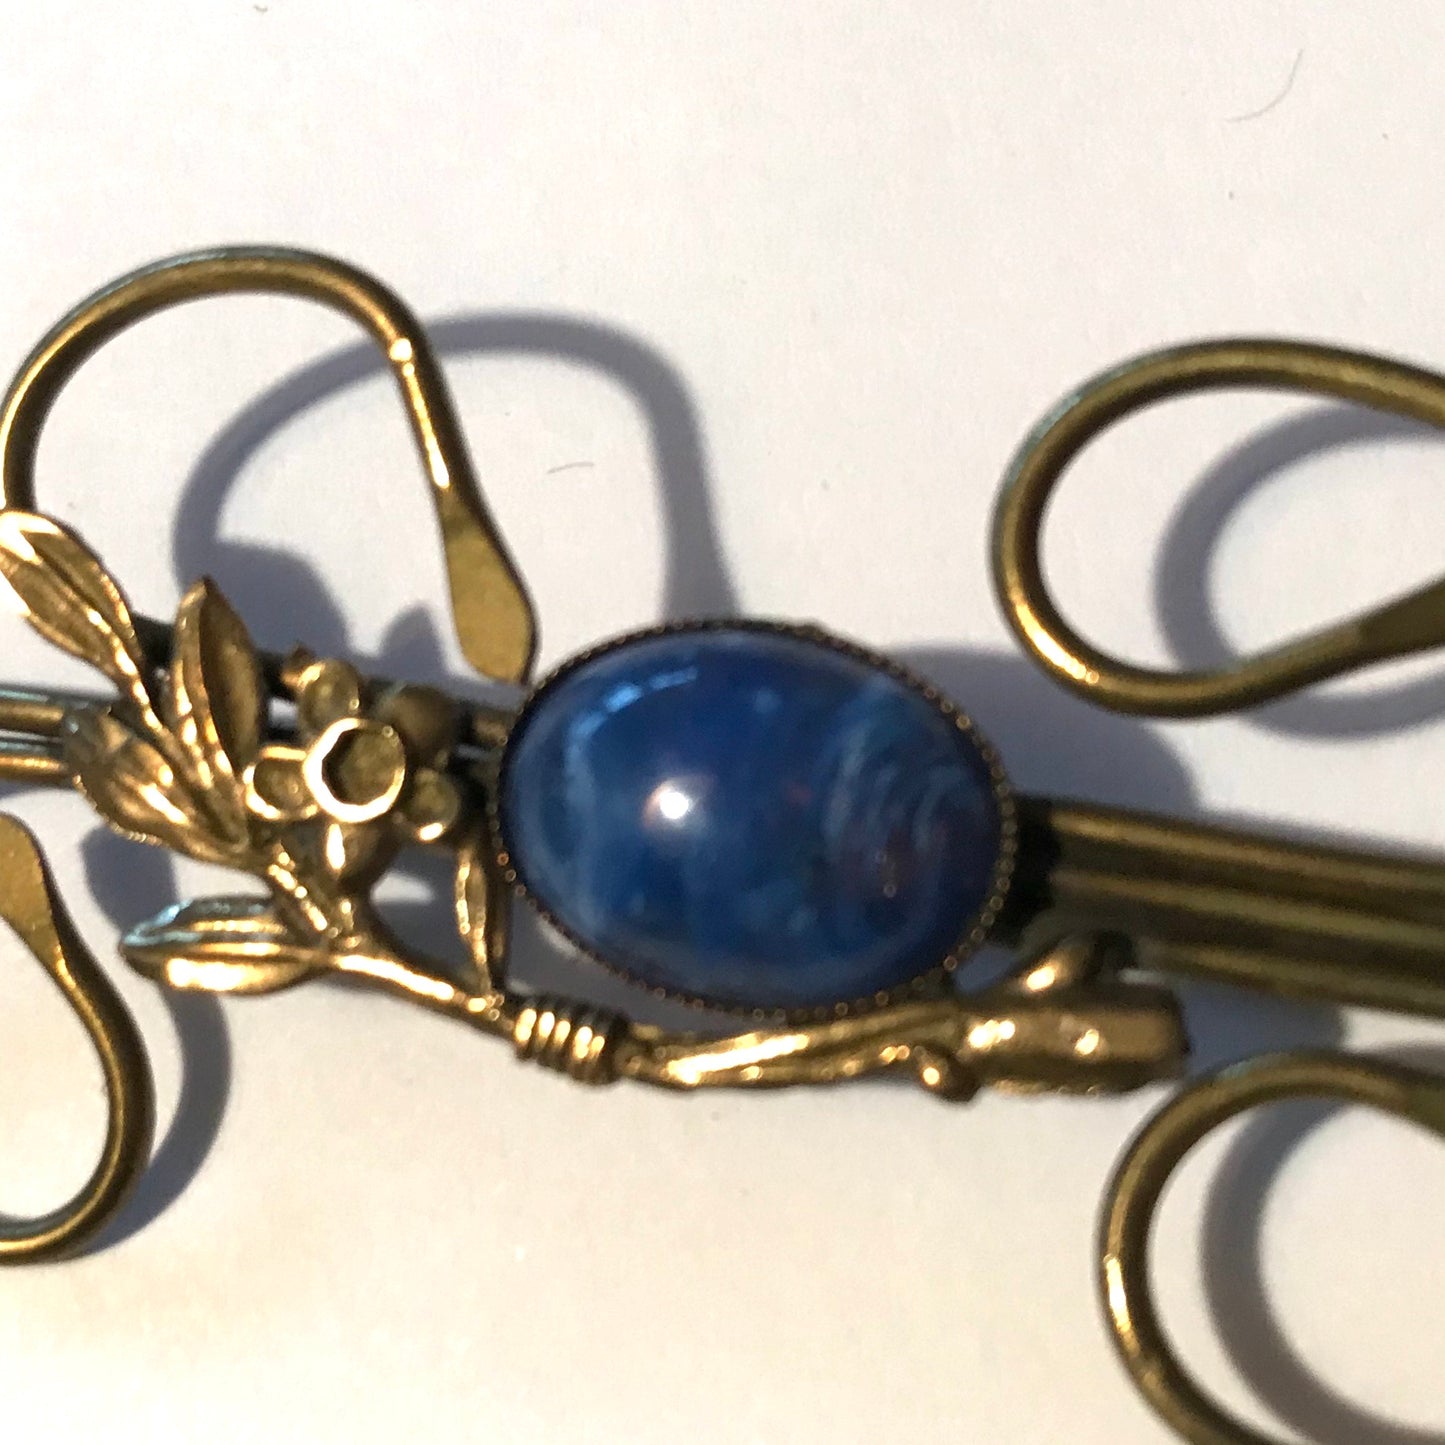 Medusa Inspired Gold Flower and Vine Brooch with Blue Art Glass Center circa 1910s